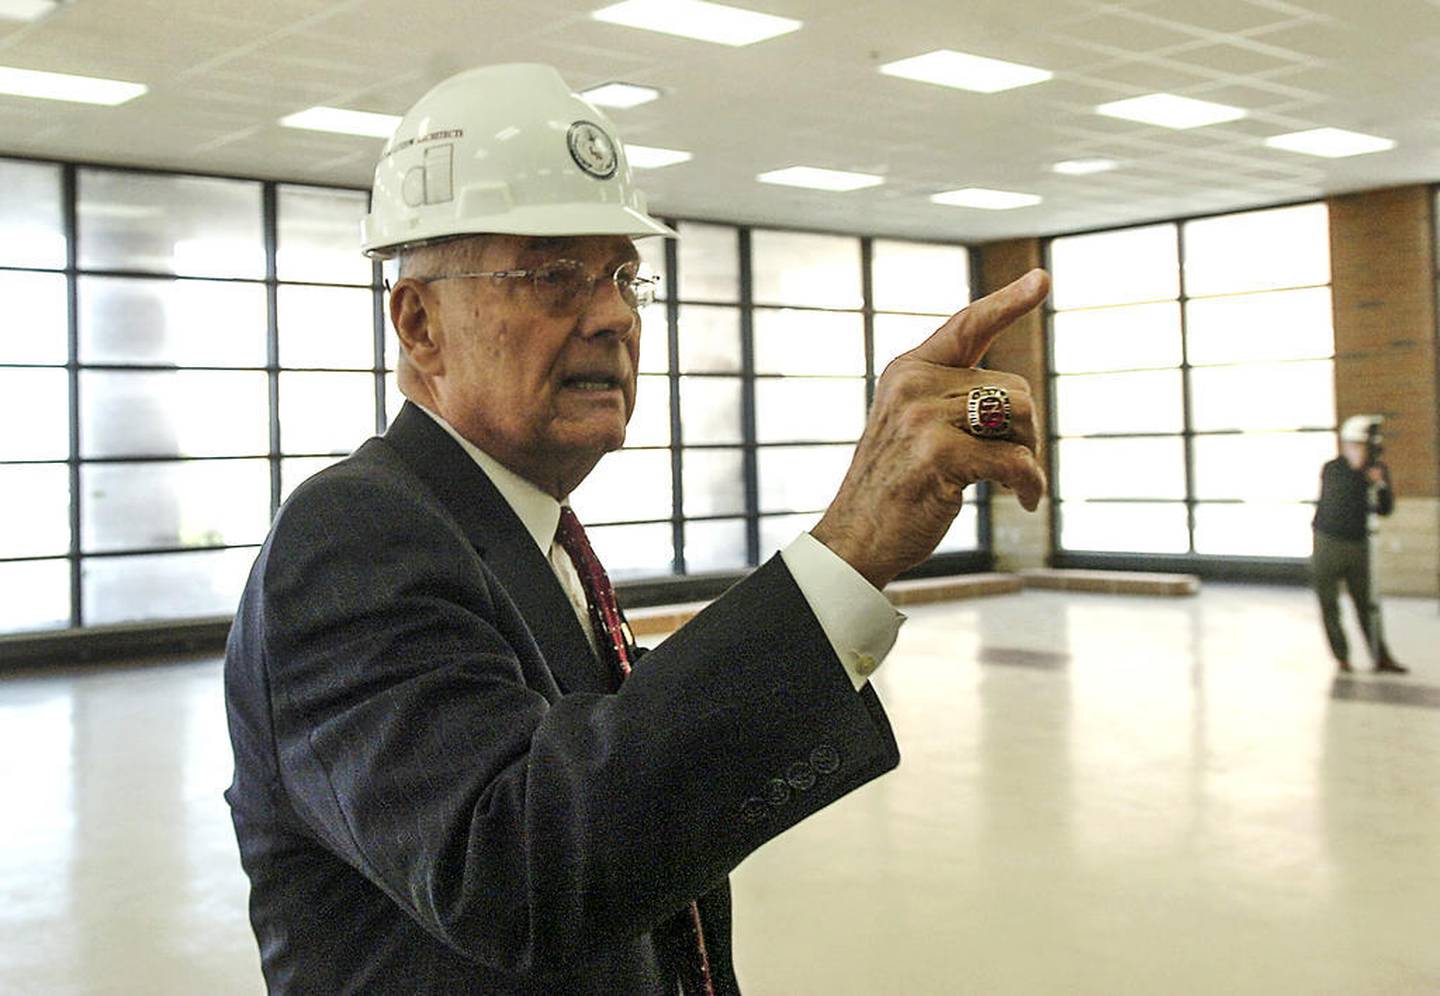 Former Lincoln-Way High School District 210 Superintendent Lawrence Wyllie leads a tour through the Lincoln-Way North High School facility April 12, 2008, in Frankfort.